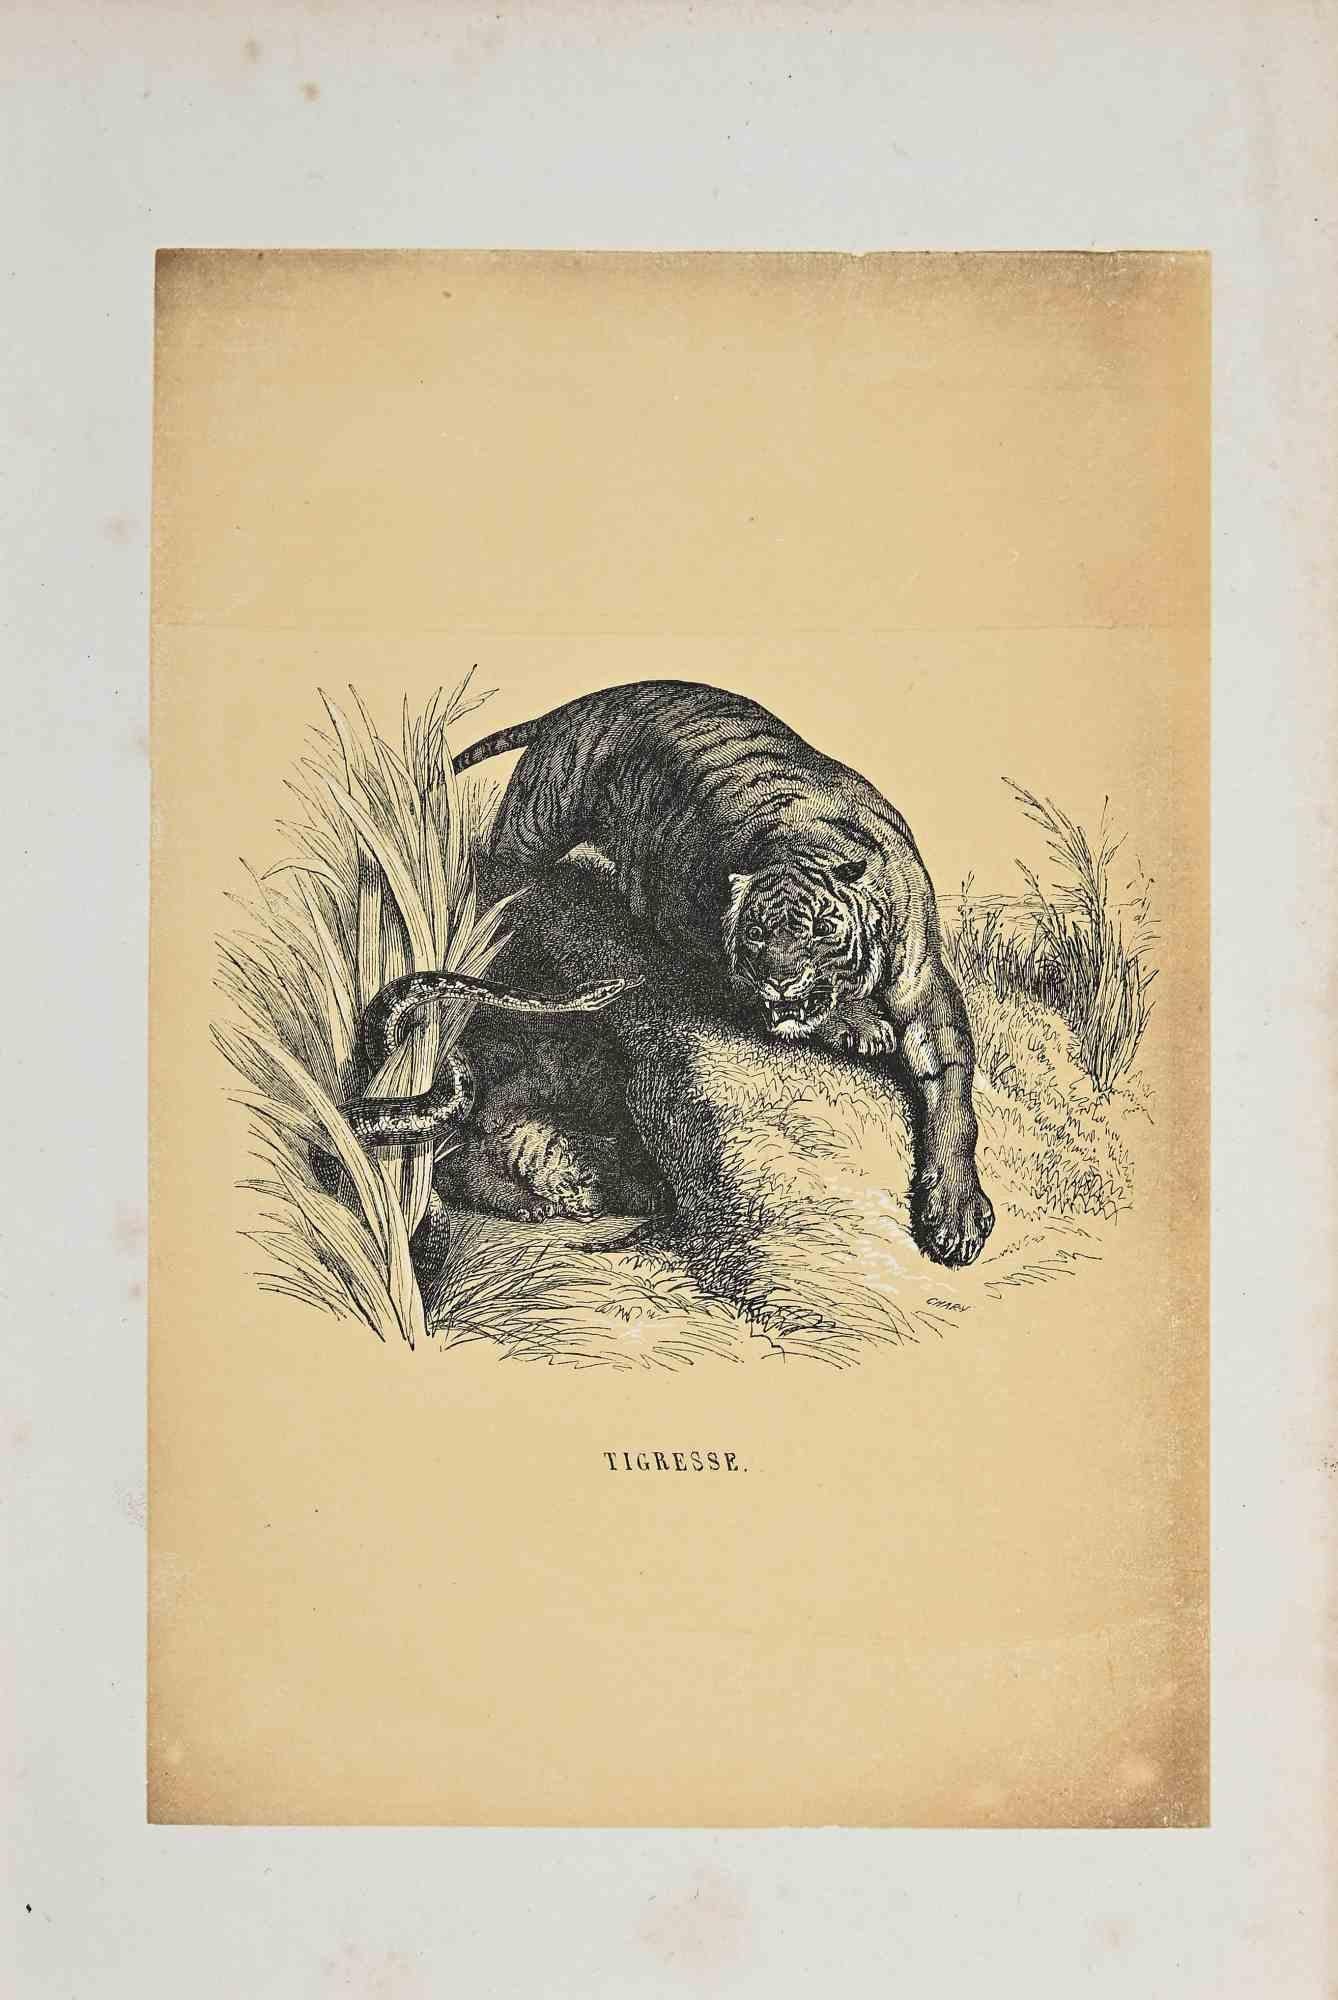 The Tiger is an original lithograph on ivory-colored paper, realized by Paul Gervais (1816-1879). The artwork is from The Series of "Les Trois Règnes de la Nature", and was published in 1854.

Good conditions with minor foxing on the frame.

Titled